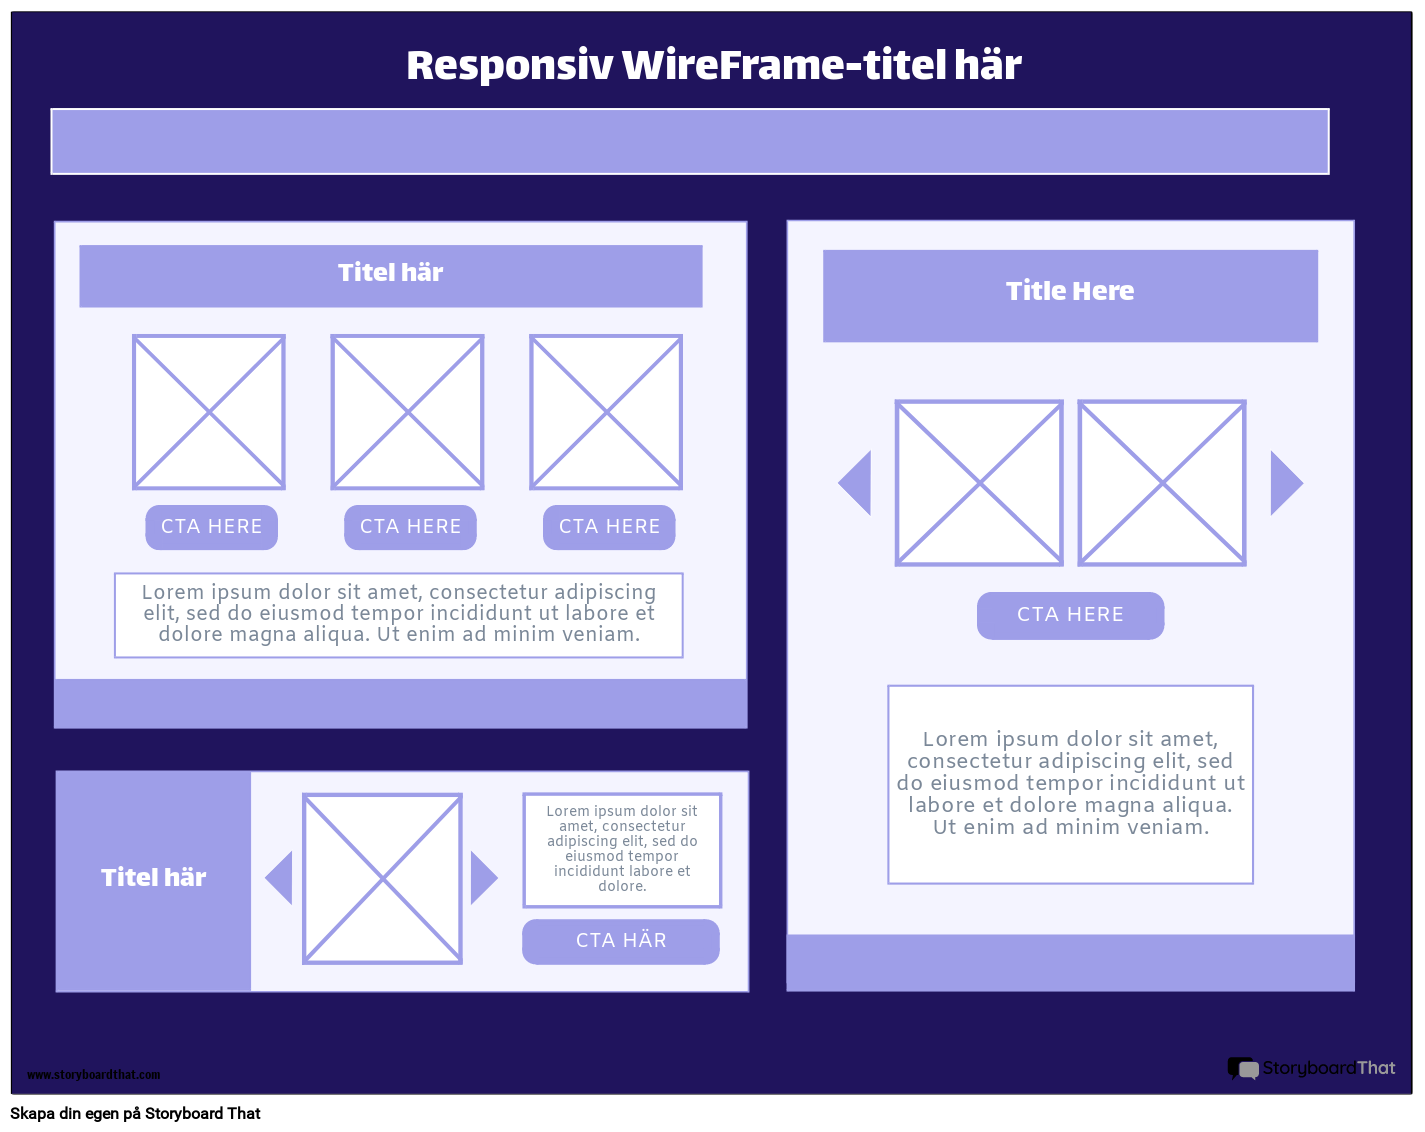 Corporate Responsive WireFrame Mall 3